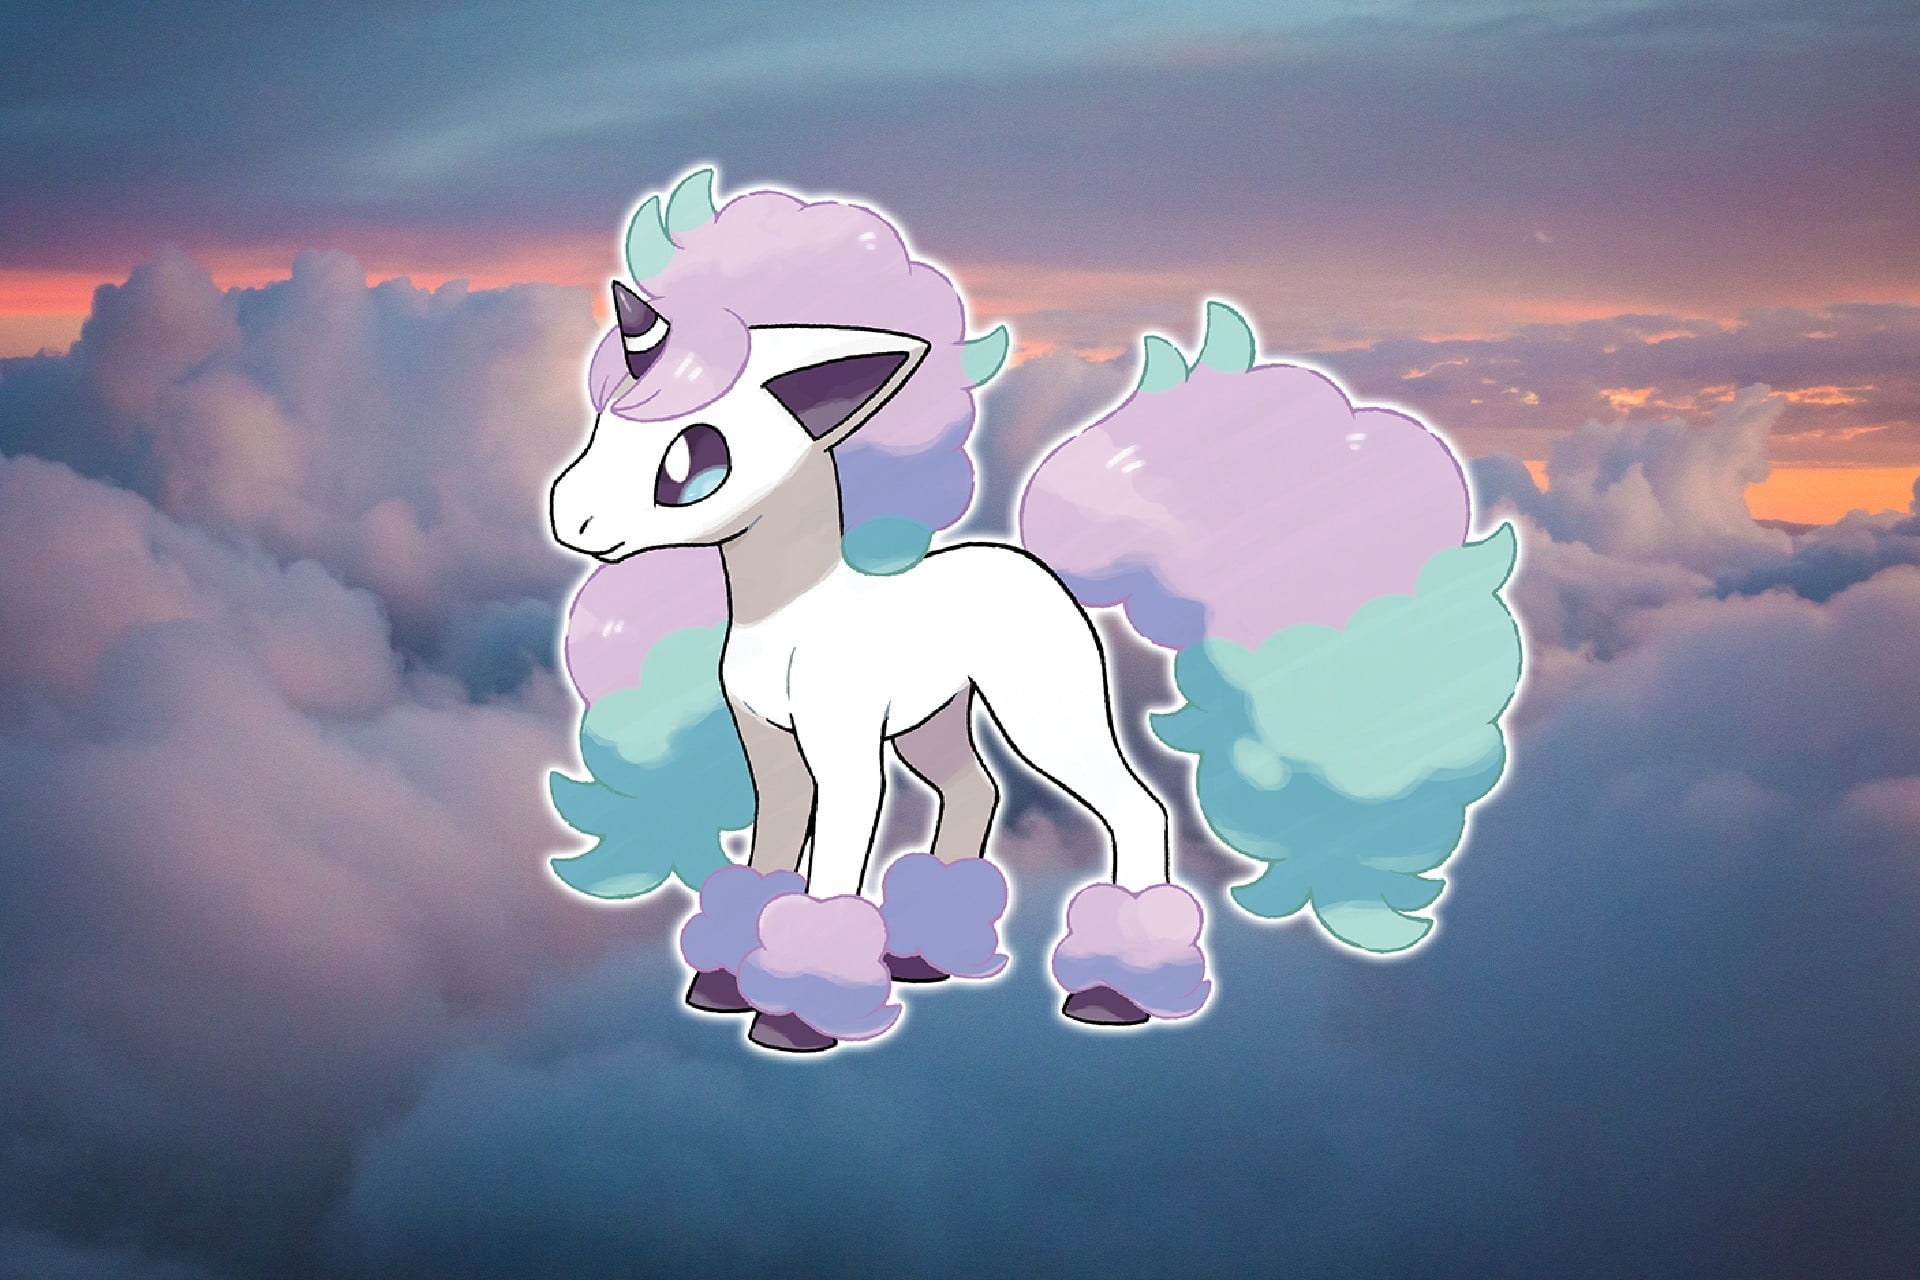 EXCLUSIVE : Galarian Ponyta is confirmed for Pokémon Shield